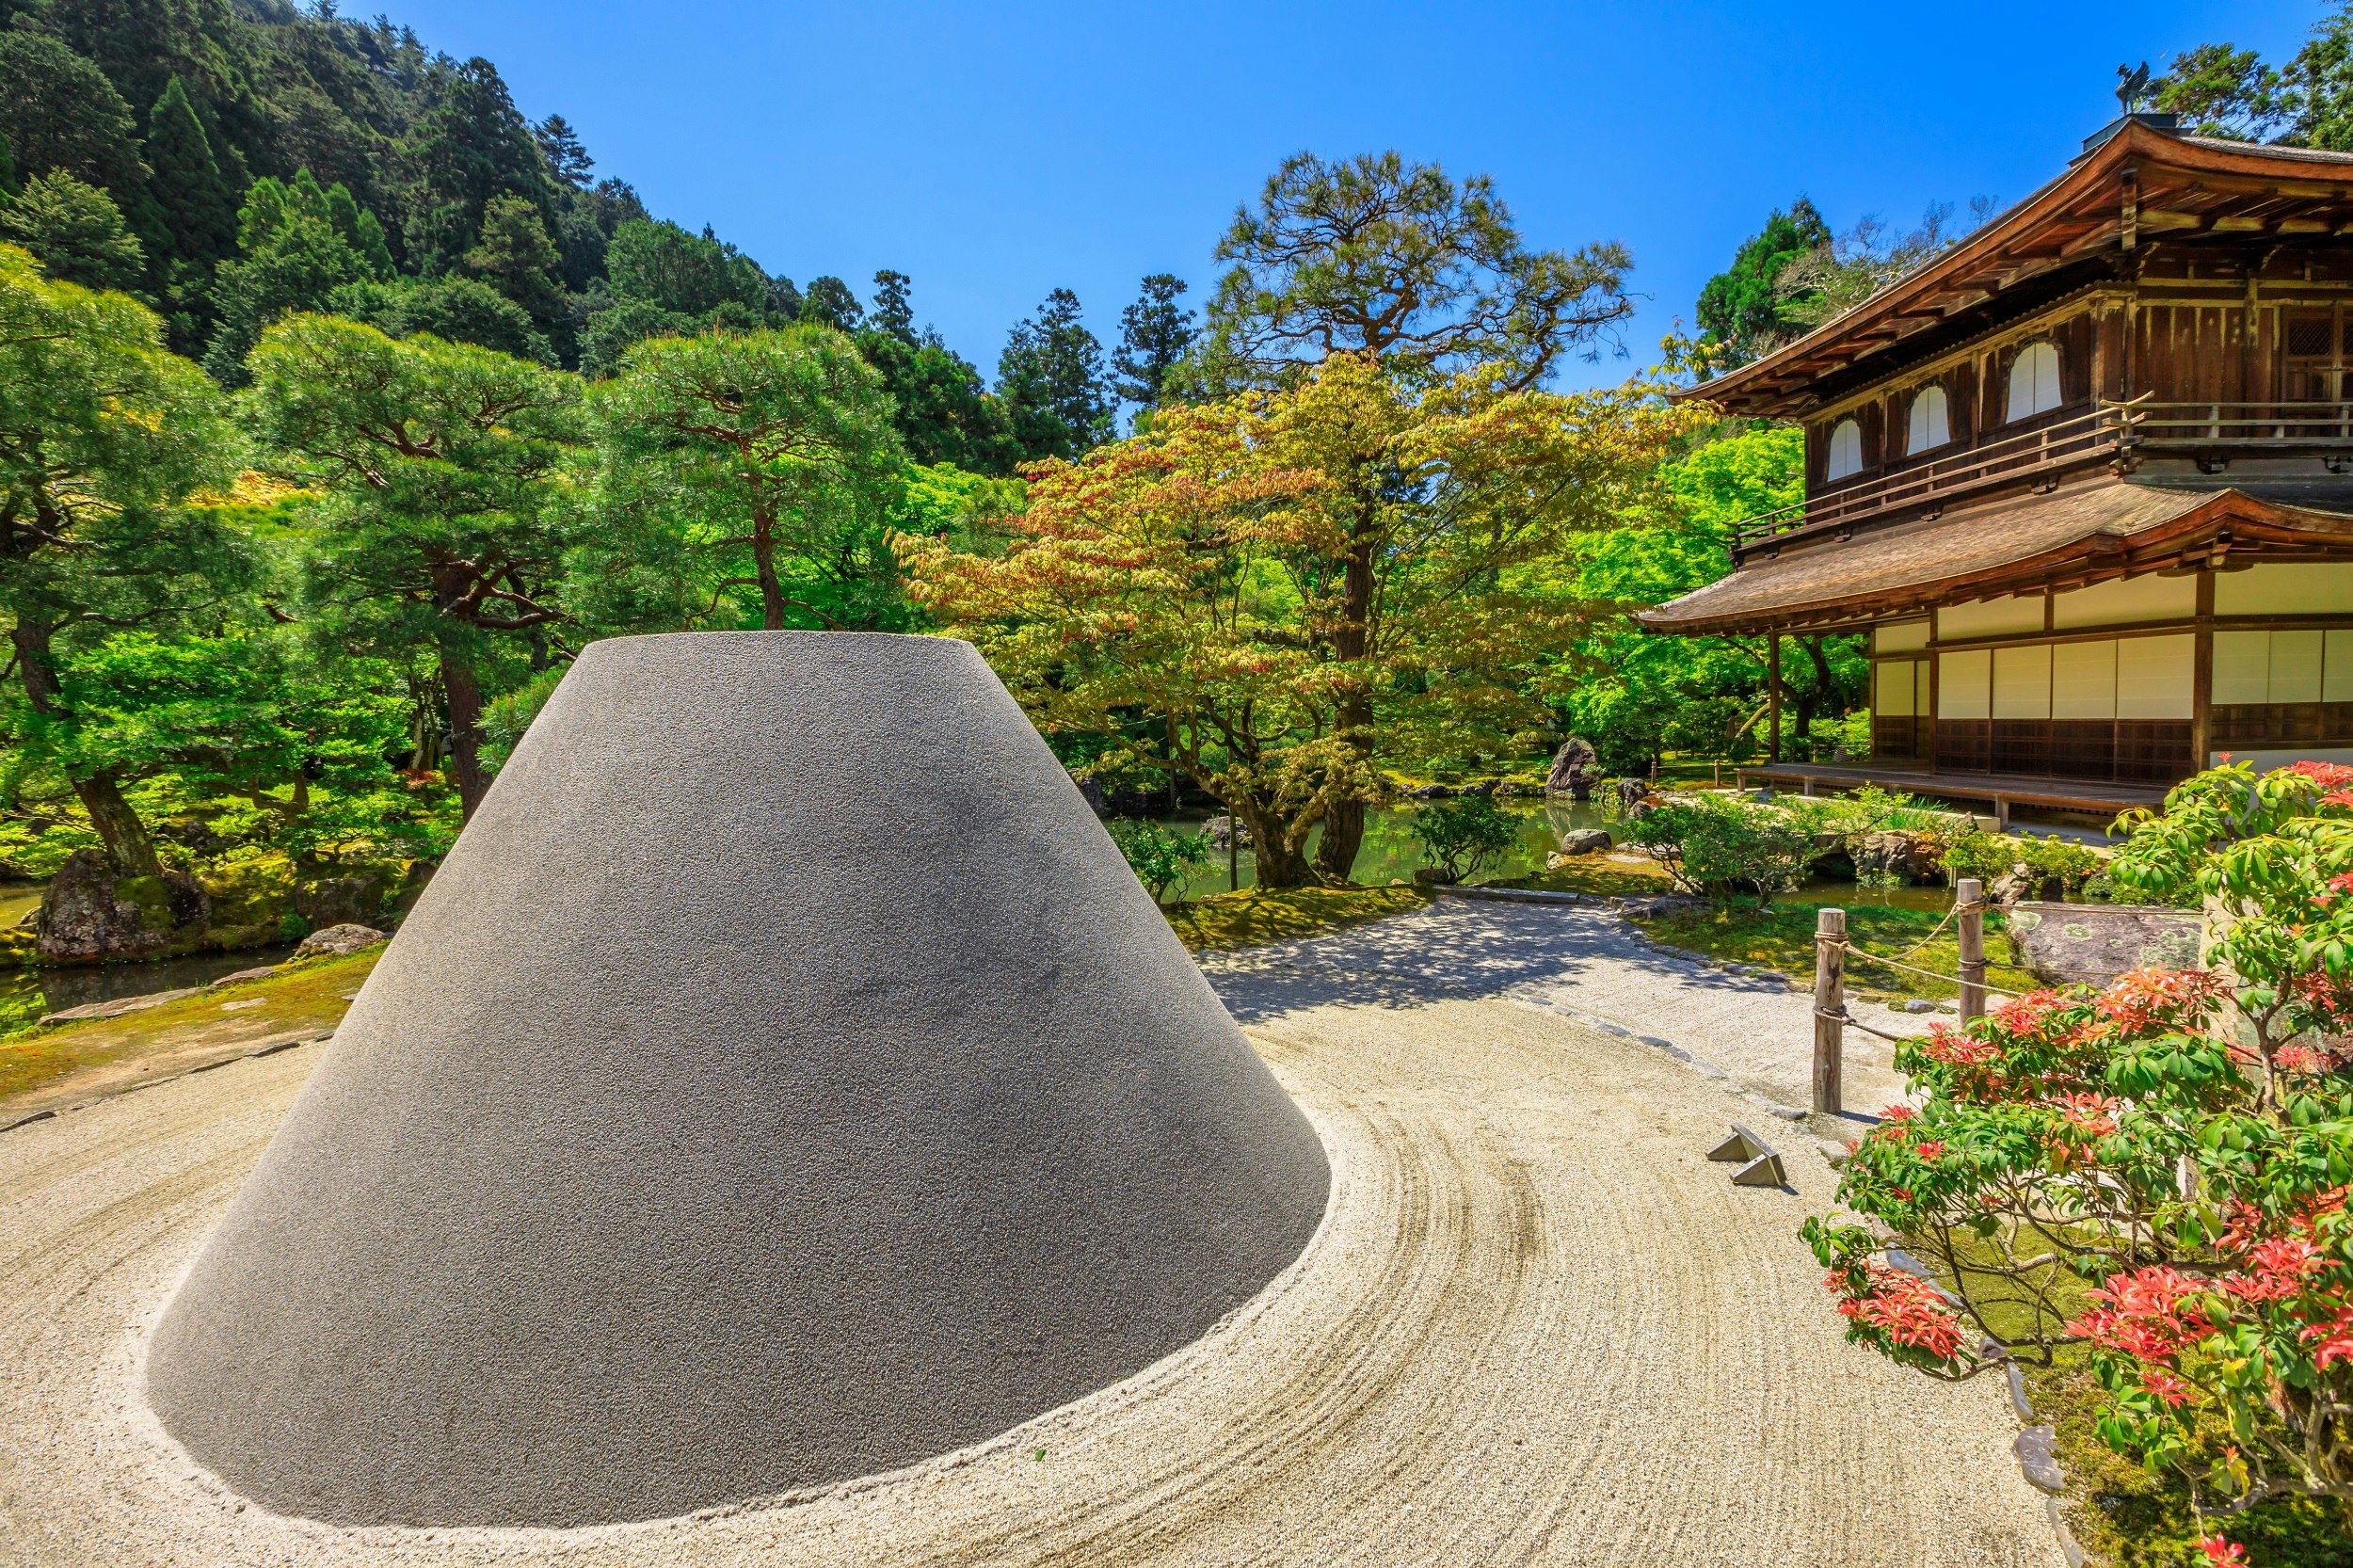 A large conical sand sculpture in a raked Zen garden, with the traditional temple of Ginkaku-ji in the background.